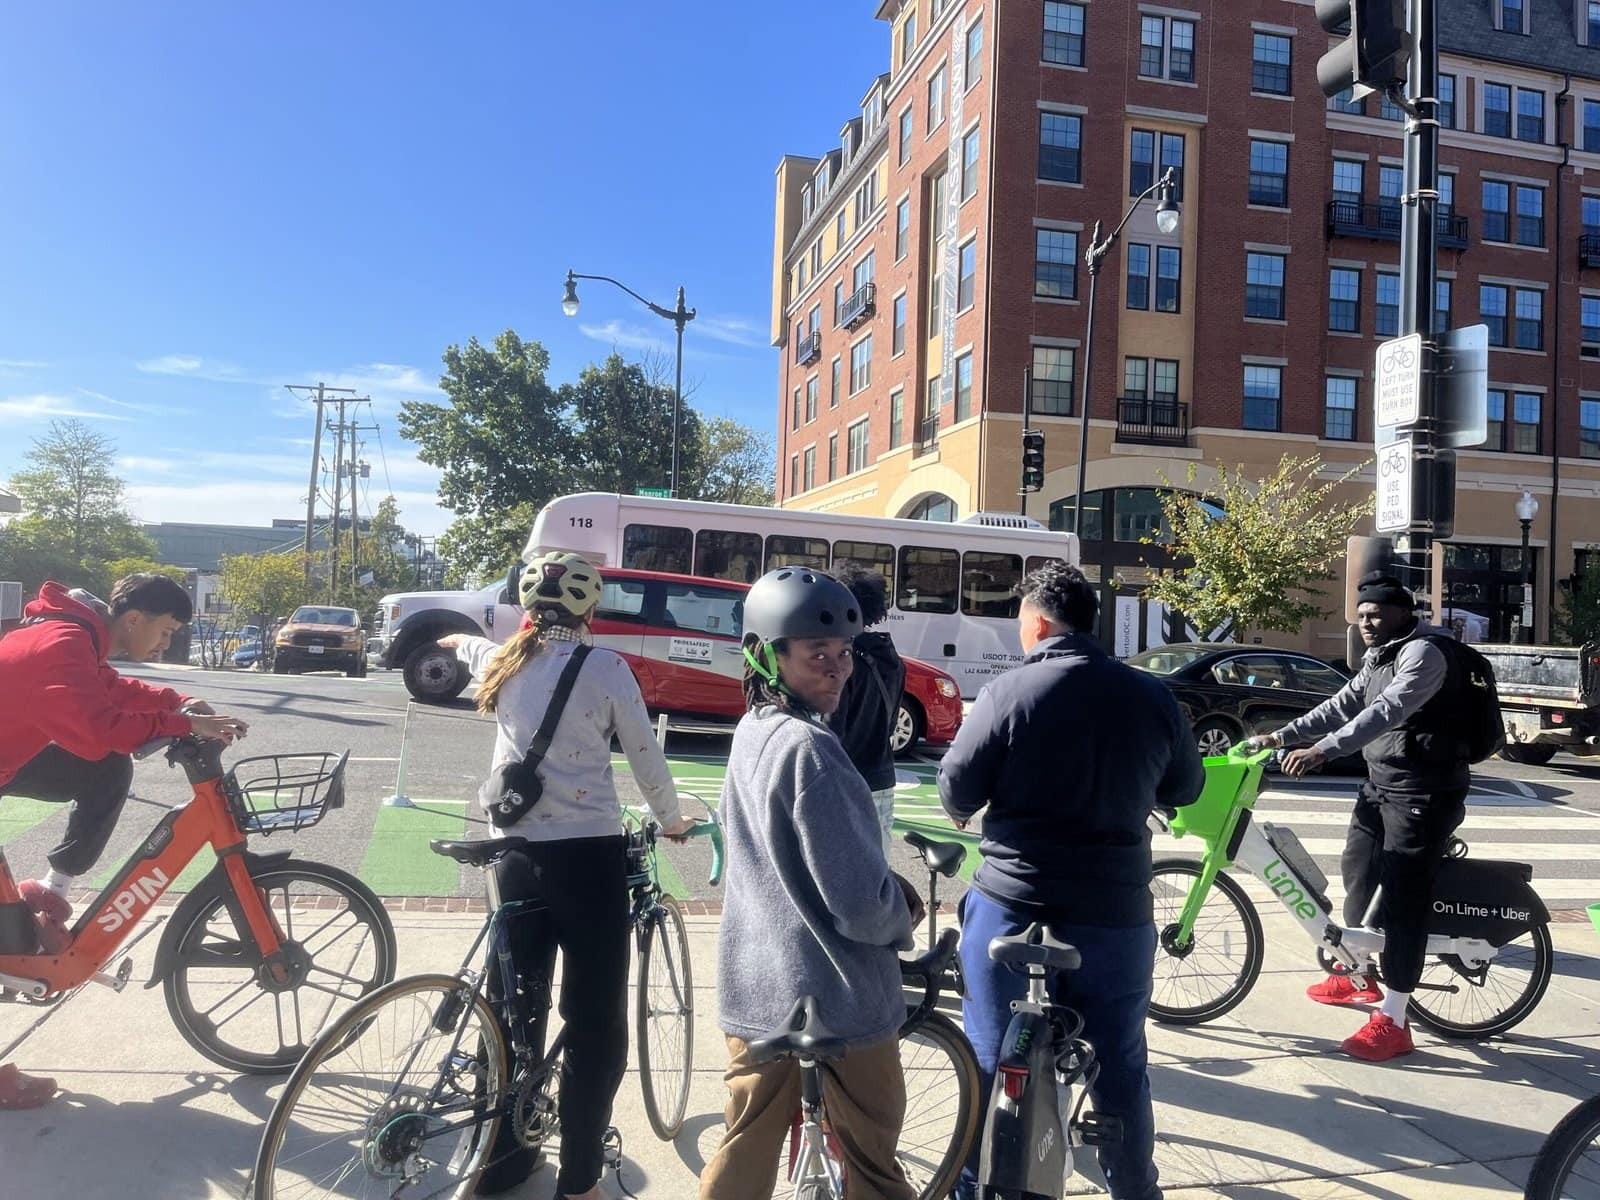 CTC joined a multimodal engineering class from Catholic University to discuss complete streets and vision zero concepts while riding along the Met Branch Trail.